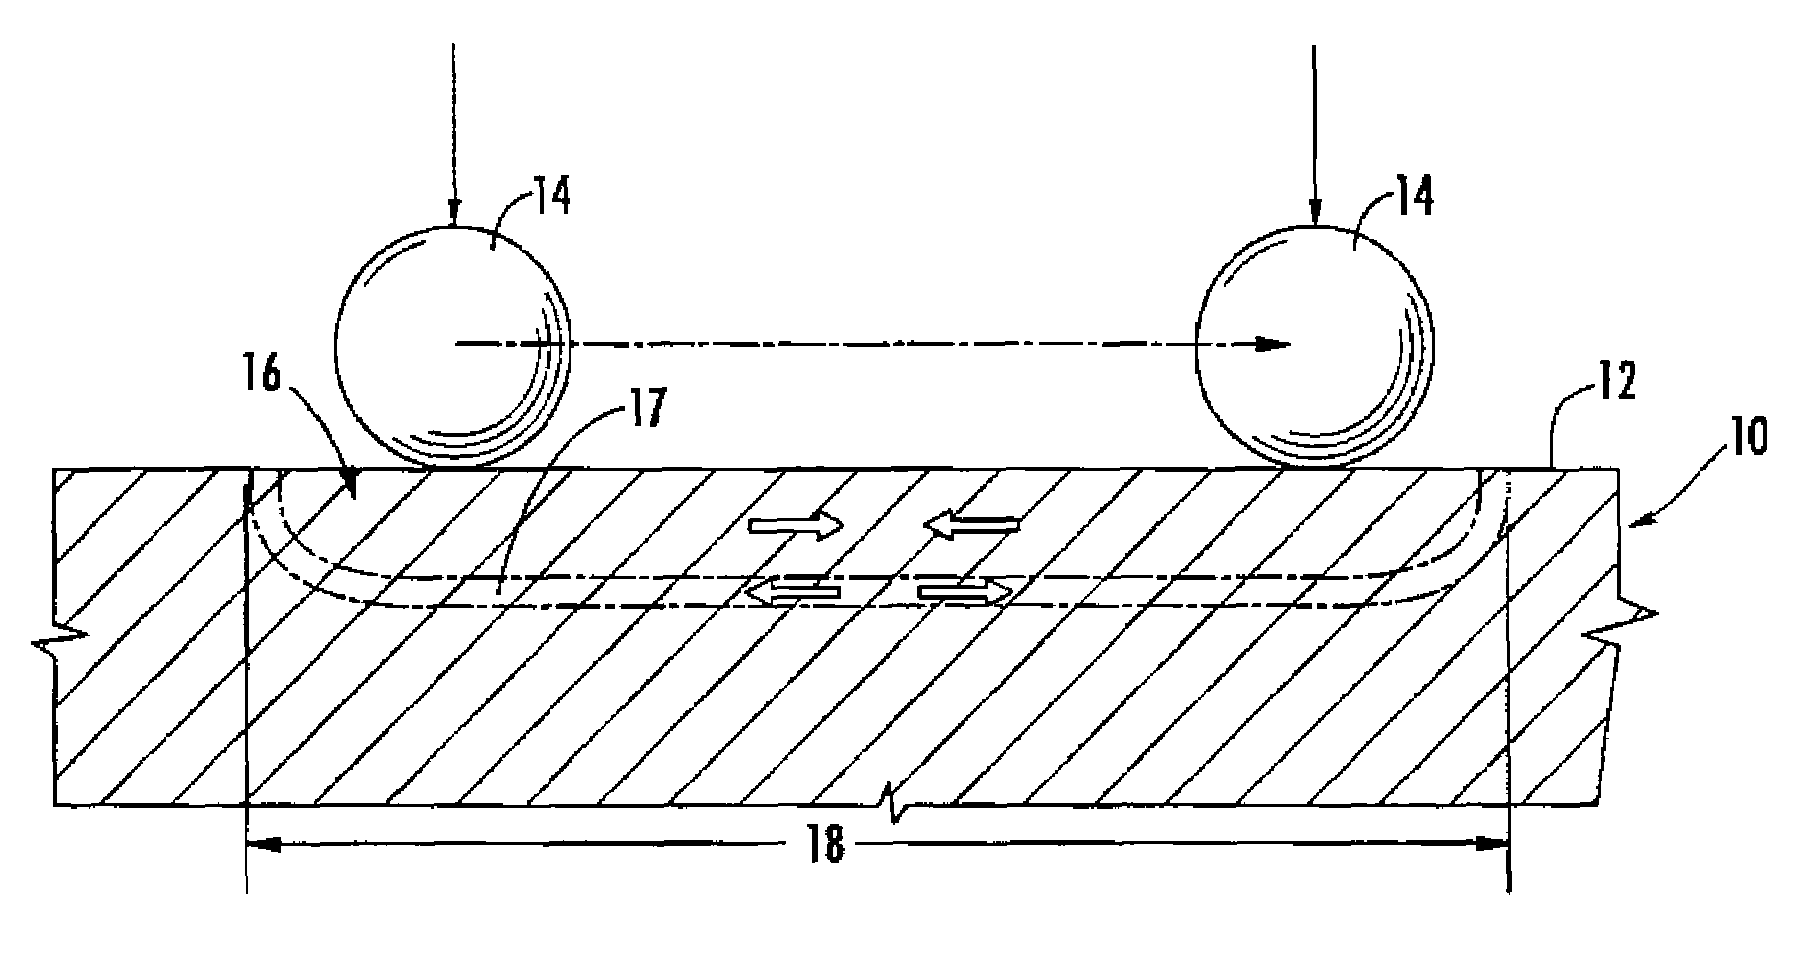 Component of variable thickness having residual compressive stresses therein, and method therefor